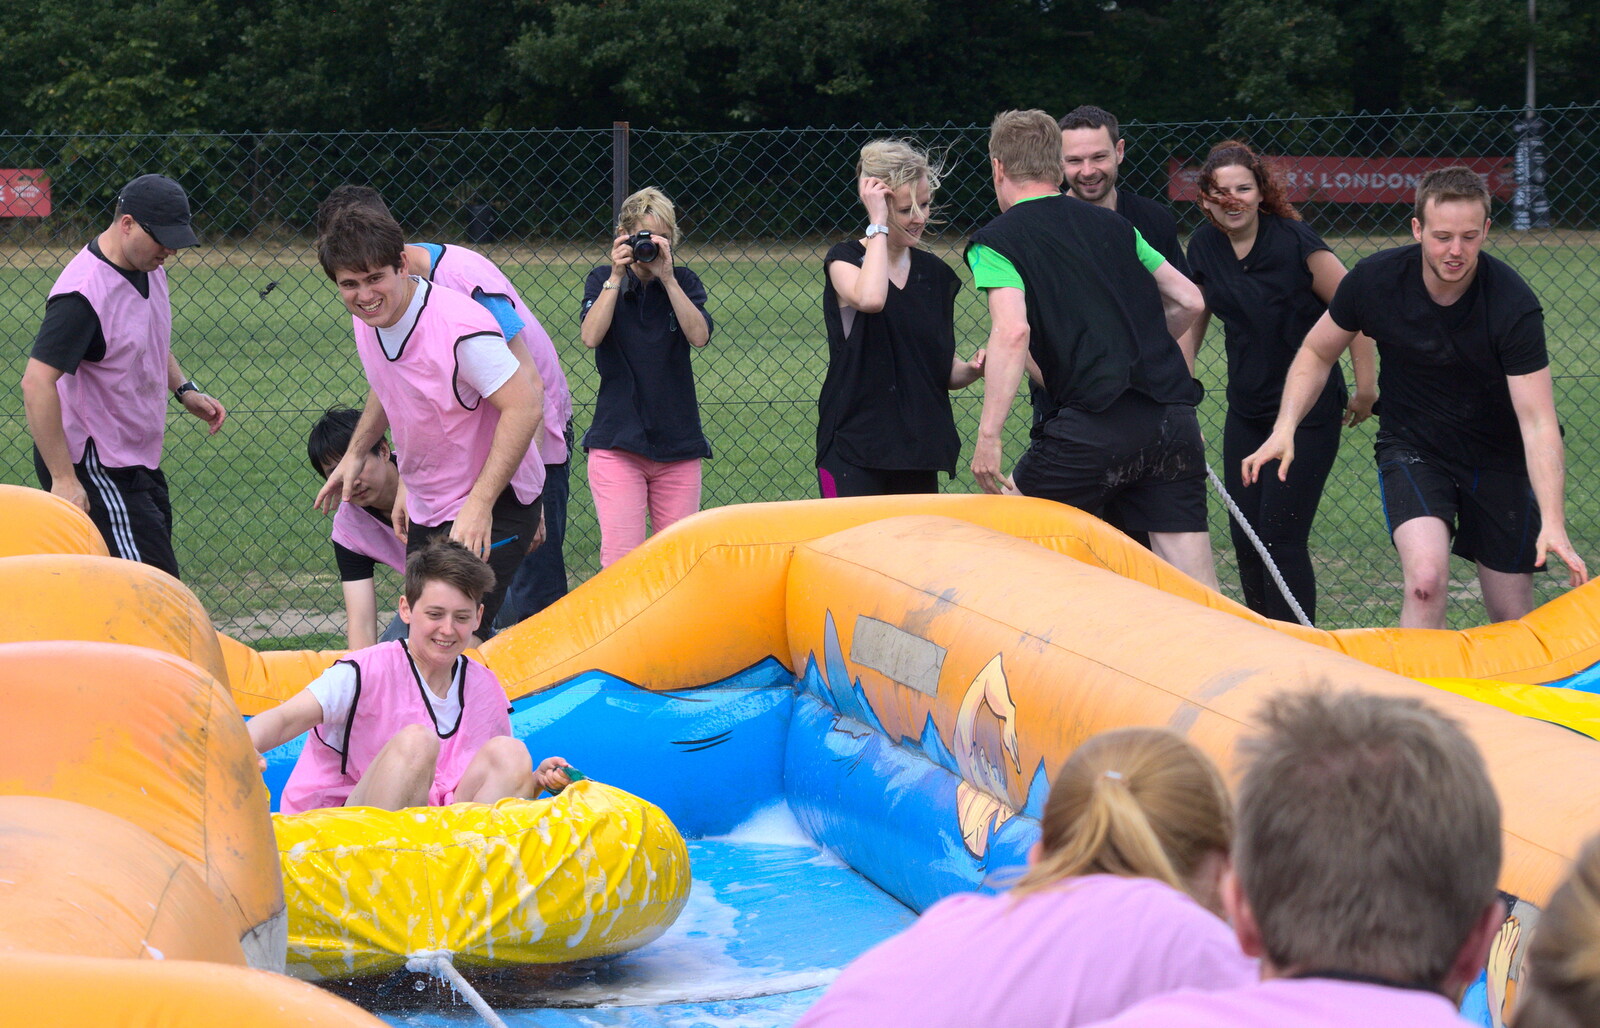 Jess comes down the slide from It's a SwiftKey Knockout, Richmond Rugby Club, Richmond, Surrey - 7th July 2015